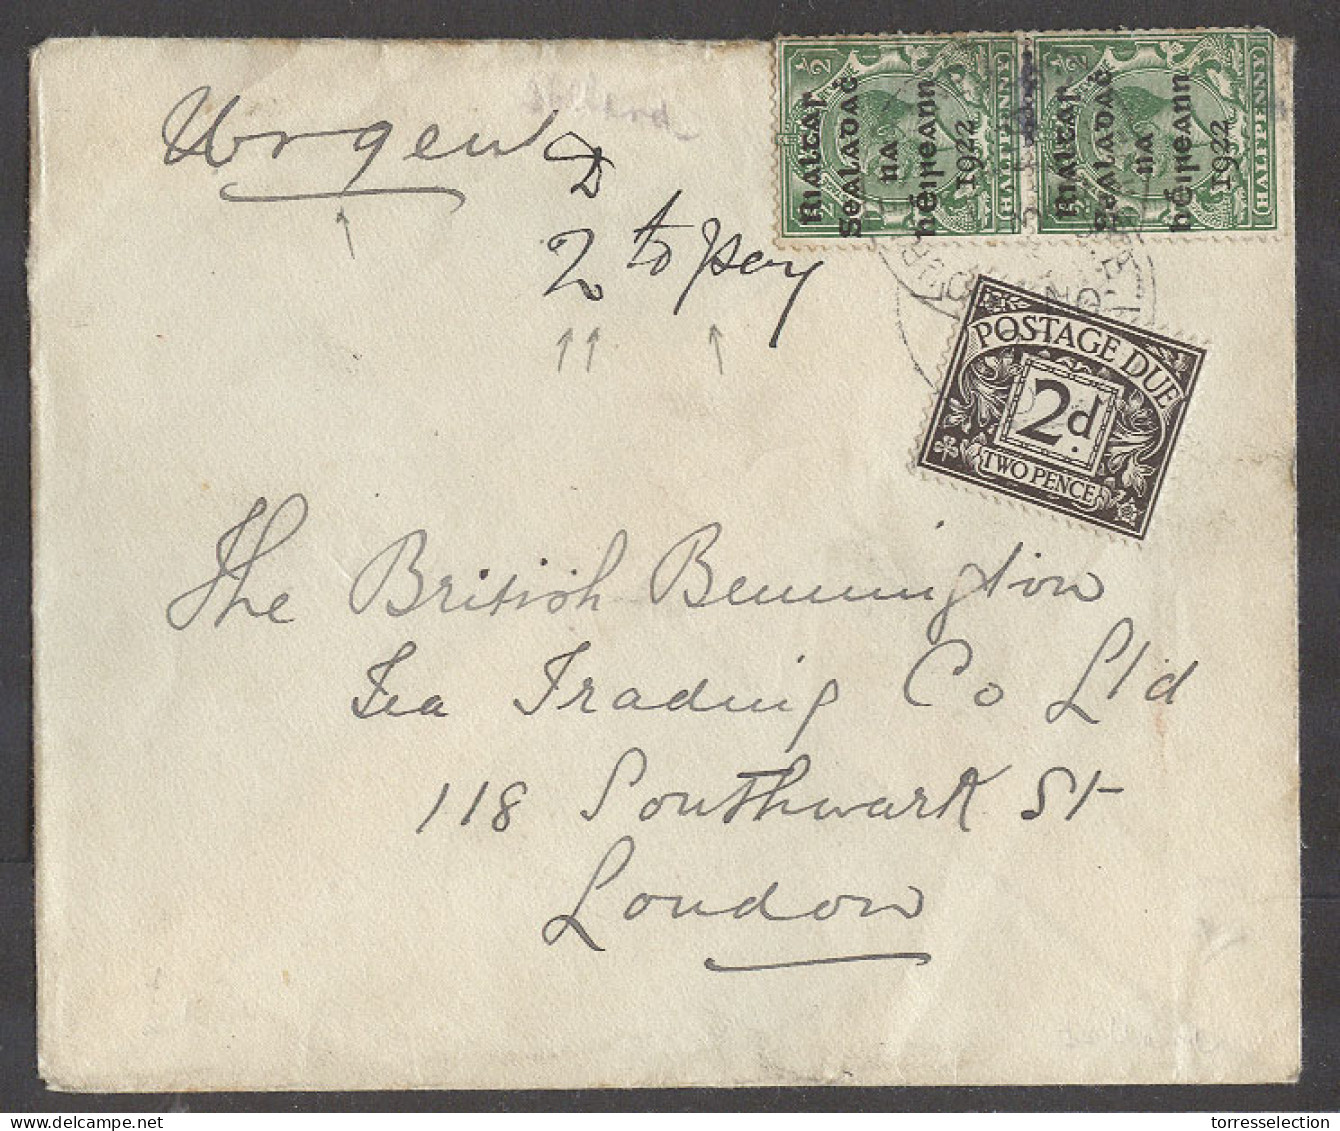 EIRE. 1922 (Oct). Fkd Env To London, UK With 1/2d Green Vert Pair Ovptd Issue Urgent Manuscript 2 To Pay GB 2d Tied Post - Oblitérés